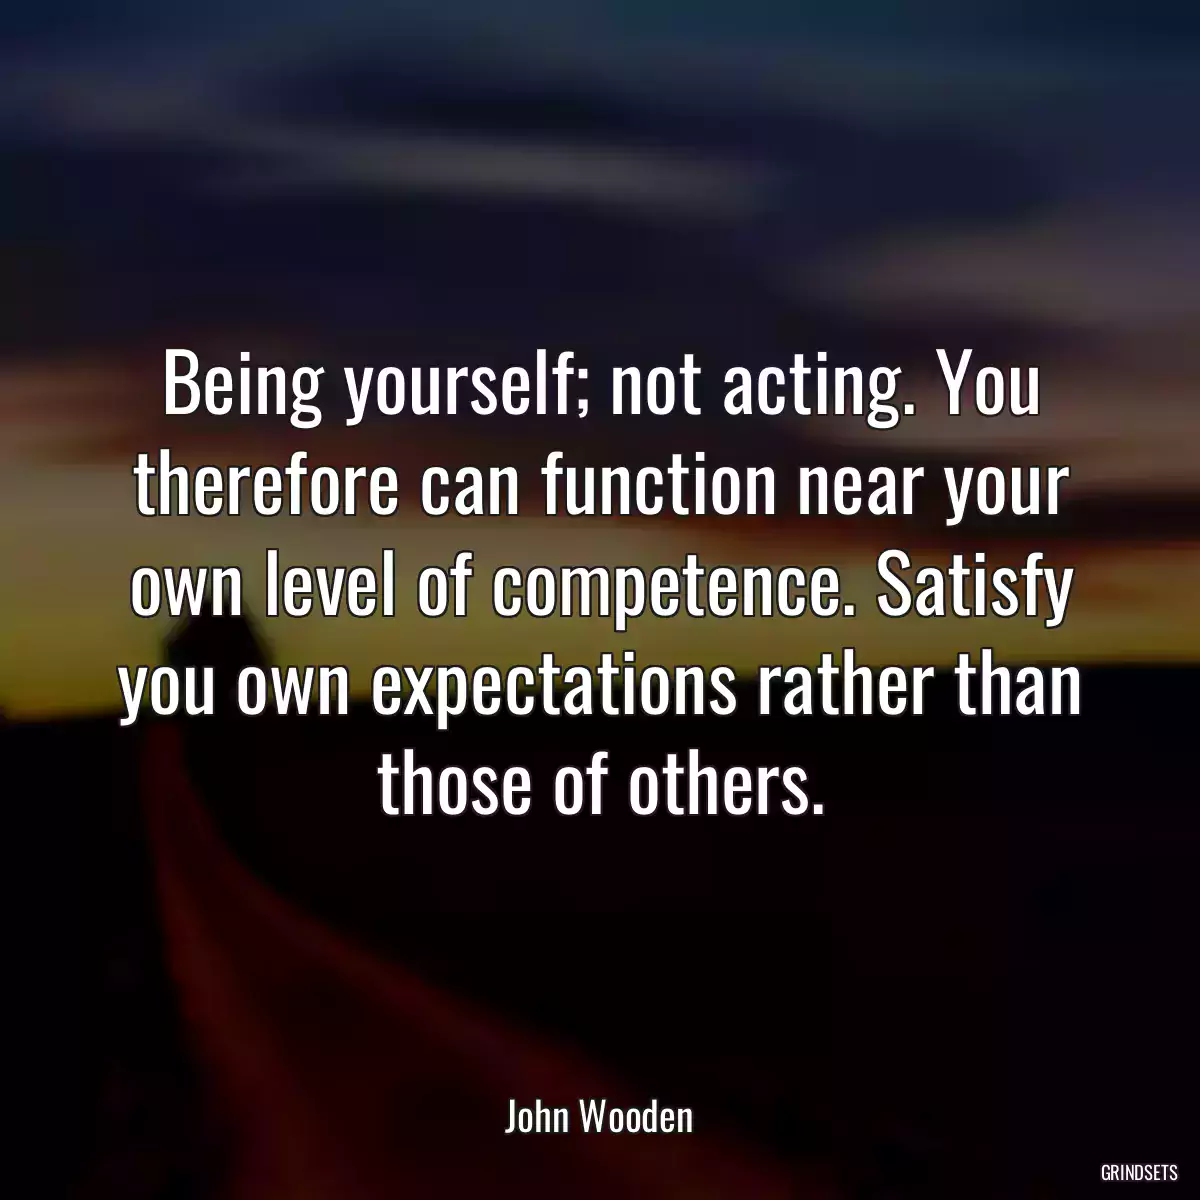 Being yourself; not acting. You therefore can function near your own level of competence. Satisfy you own expectations rather than those of others.